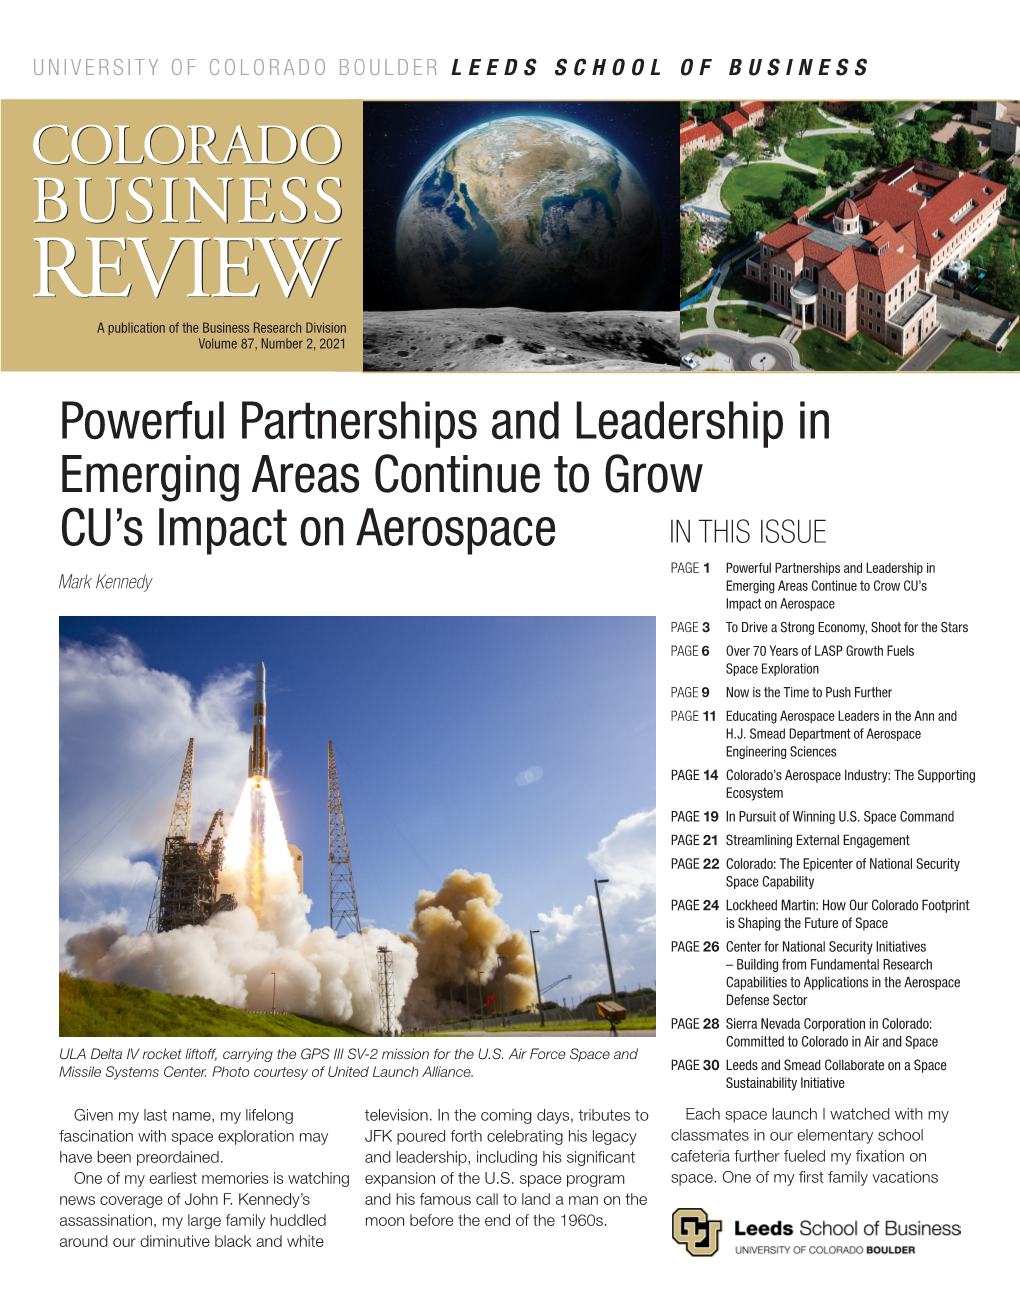 Powerful Partnerships and Leadership in Emerging Areas Continue To